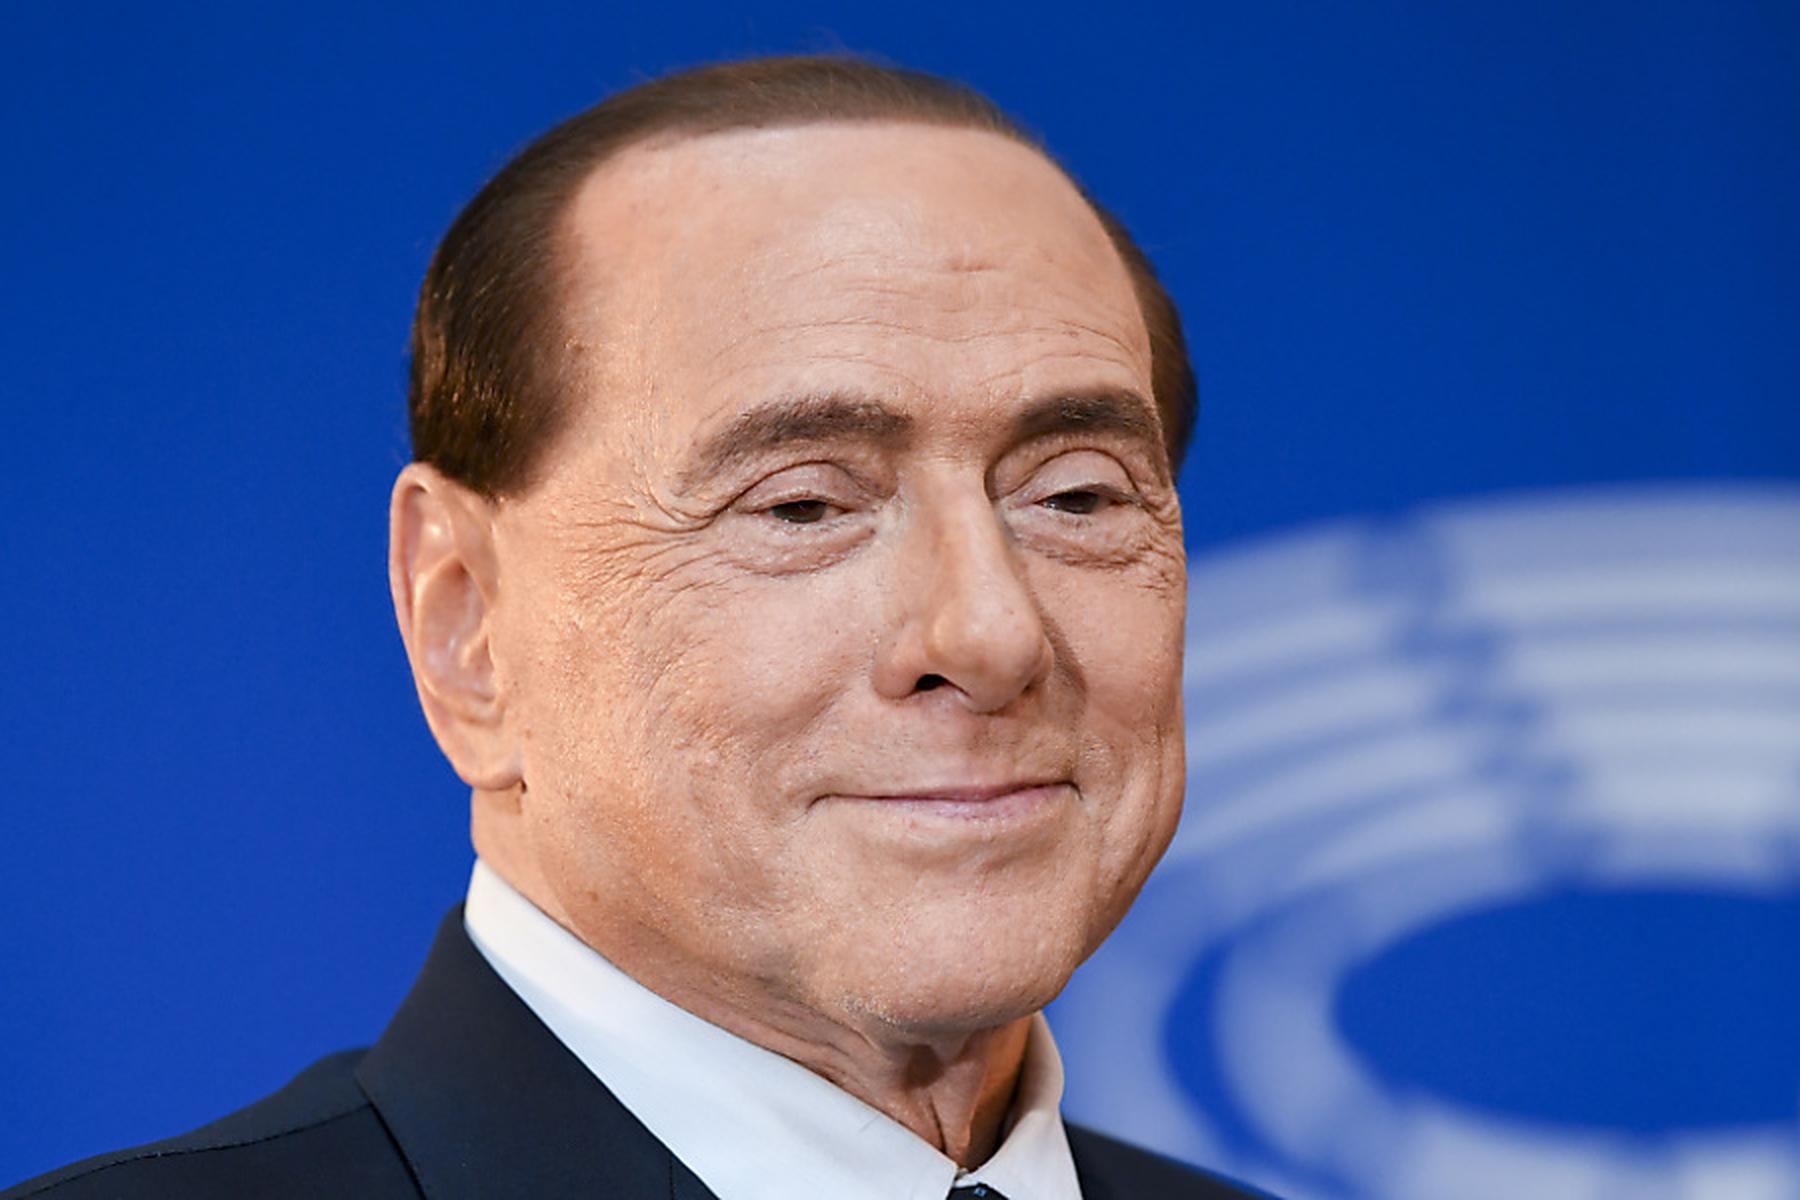 Mailand: Petition gegen Berlusconi-Airport in Mailand